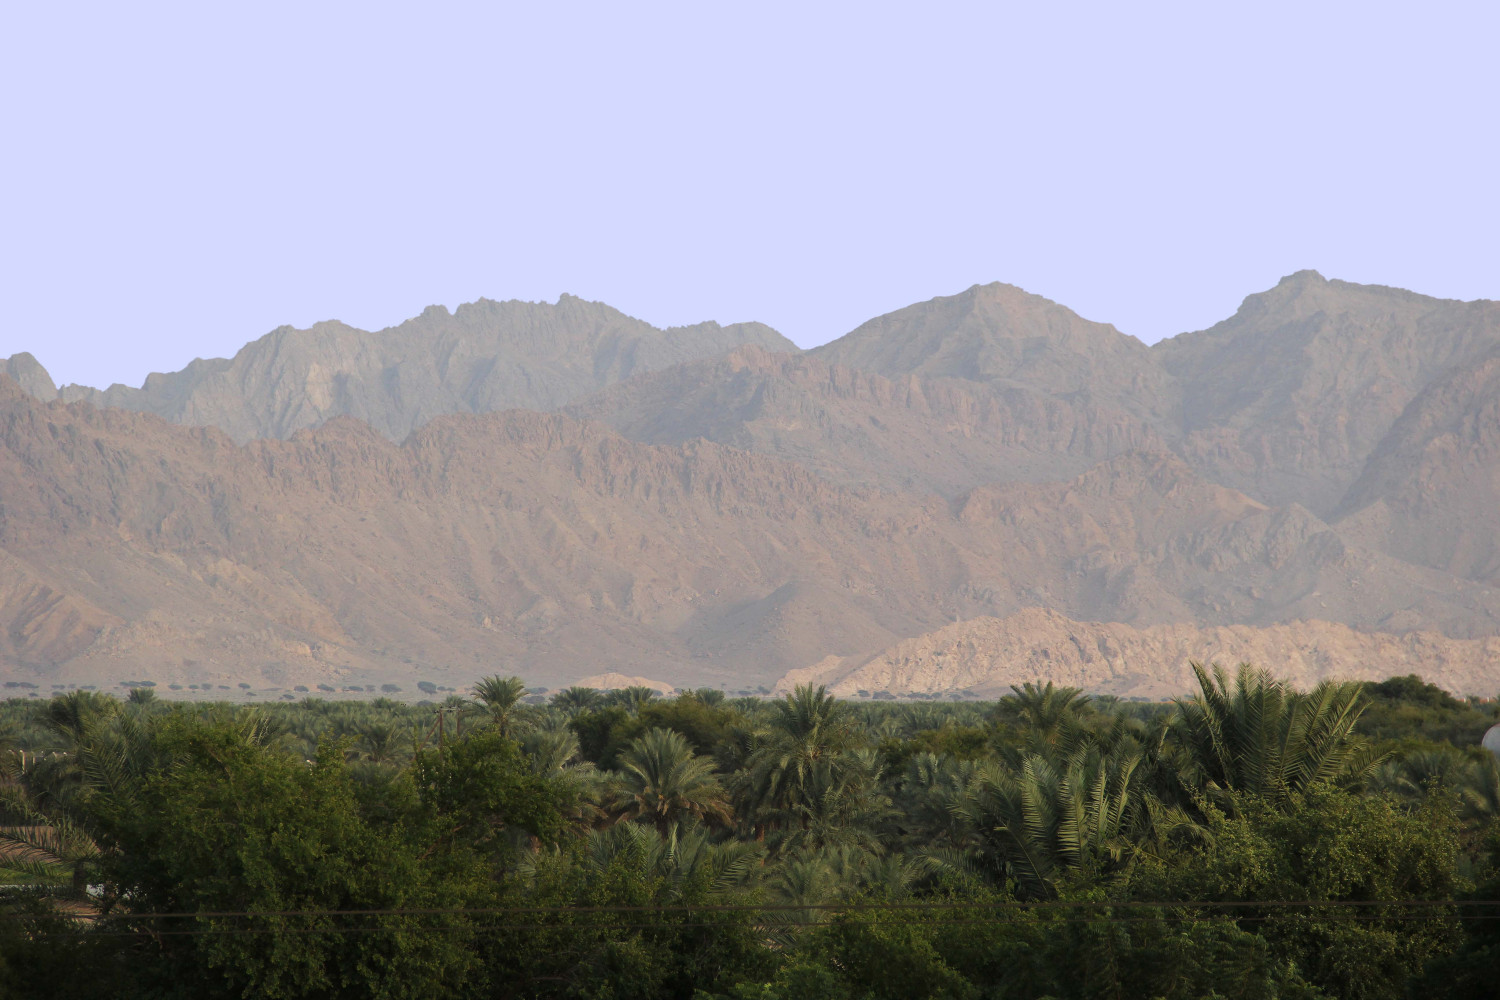 Hatta is one of the best off the beaten path things to see in Dubai. Discover the top attractions in Dubai along with lesser known things to do in Dubai, food in Dubai, Dubai tips and hotels in Dubai from this comprehensive travel guide to Dubai UAE. #dubai #dubaiguide #dubaitravelguide #dubaiattractions #dubaithingstodo #travel #uae #dubaitips